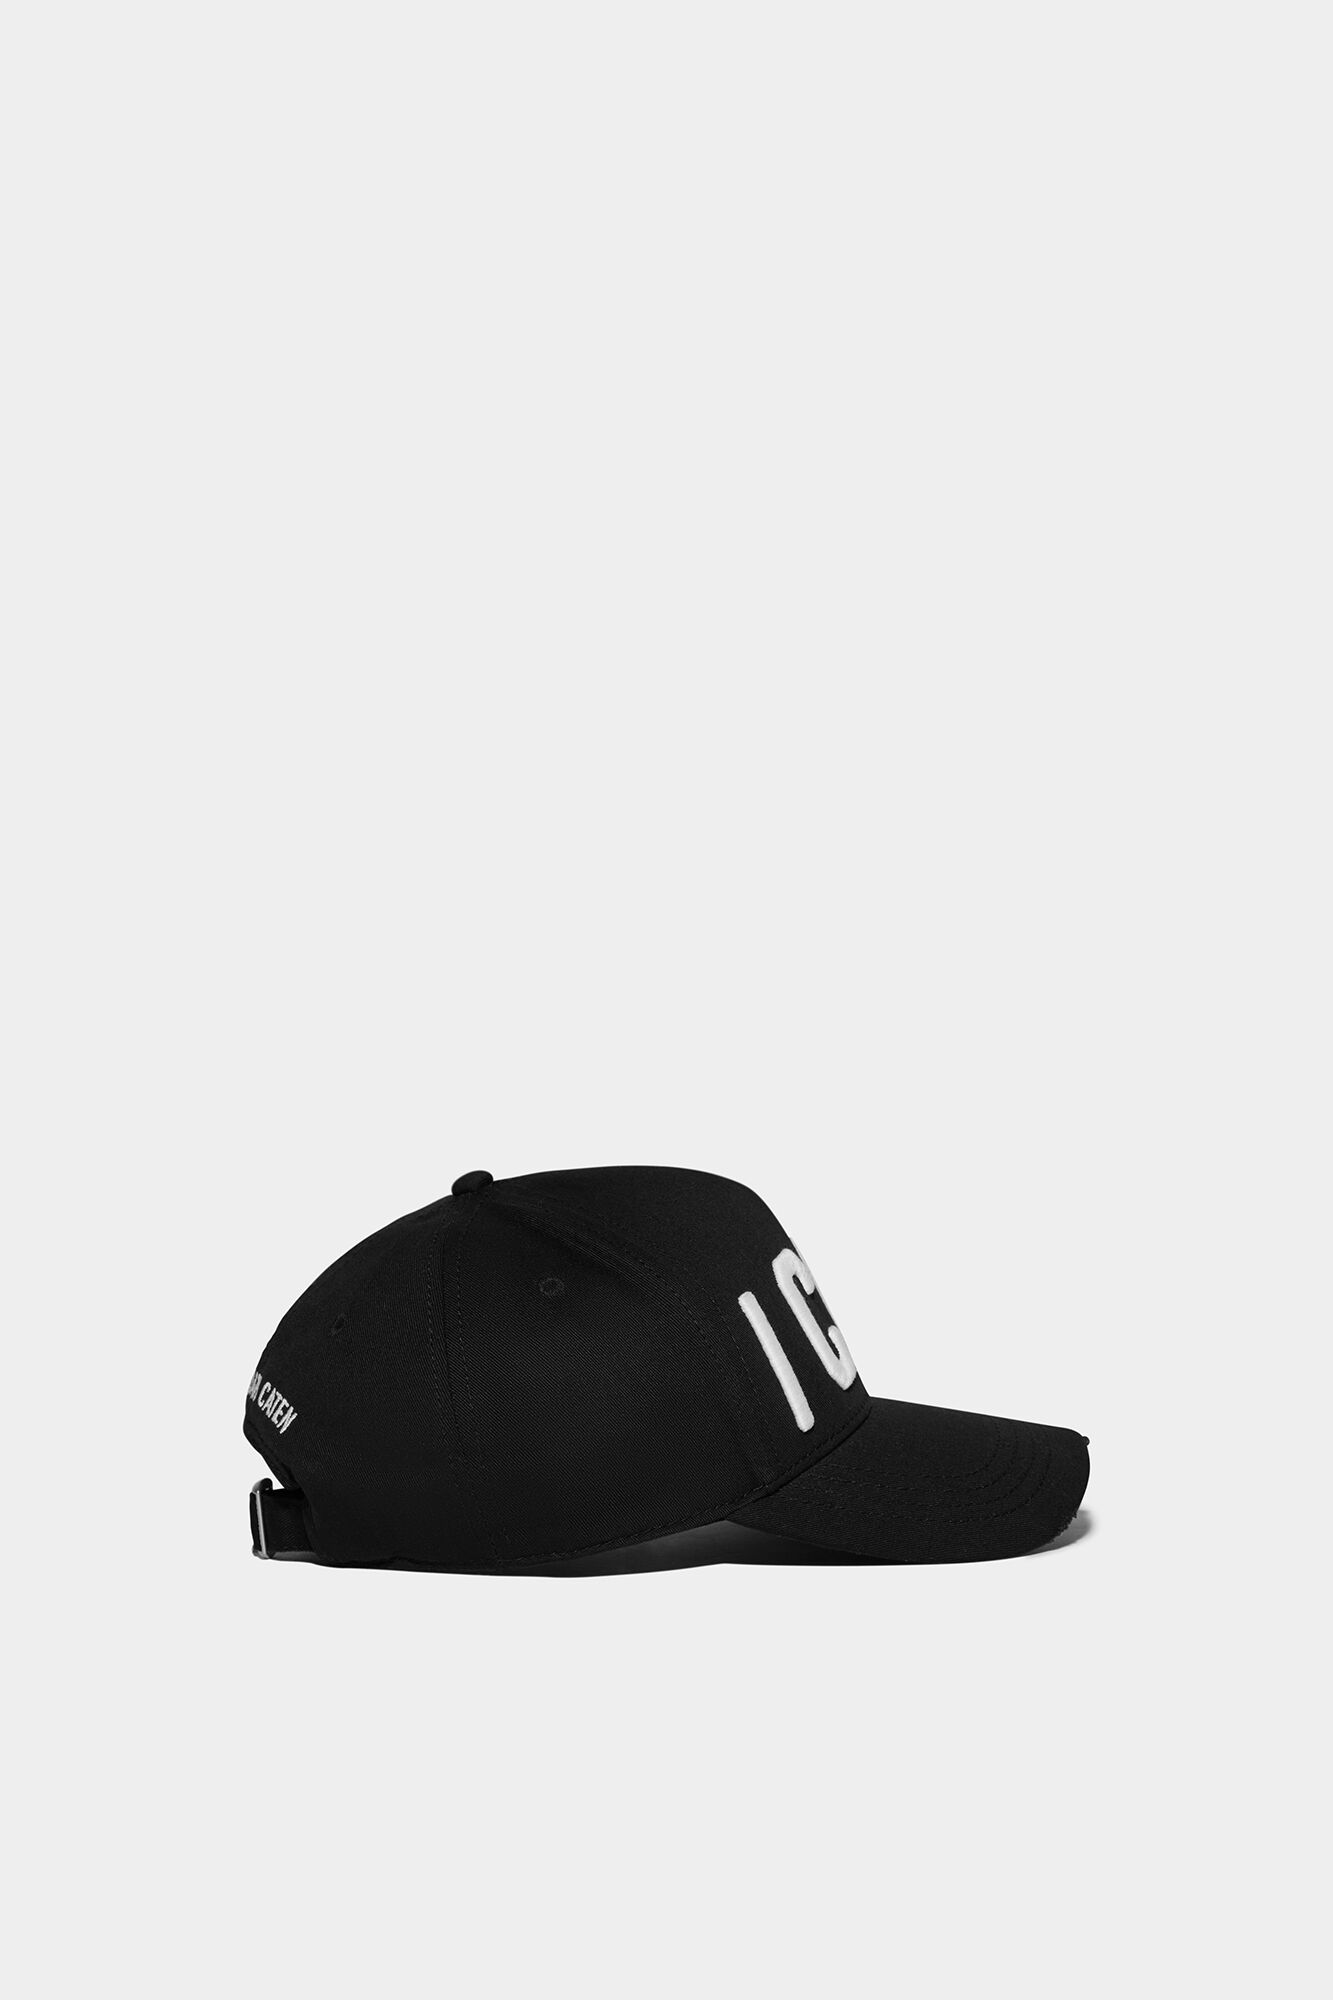 ICON Men's Hats and Caps | DSQUARED2